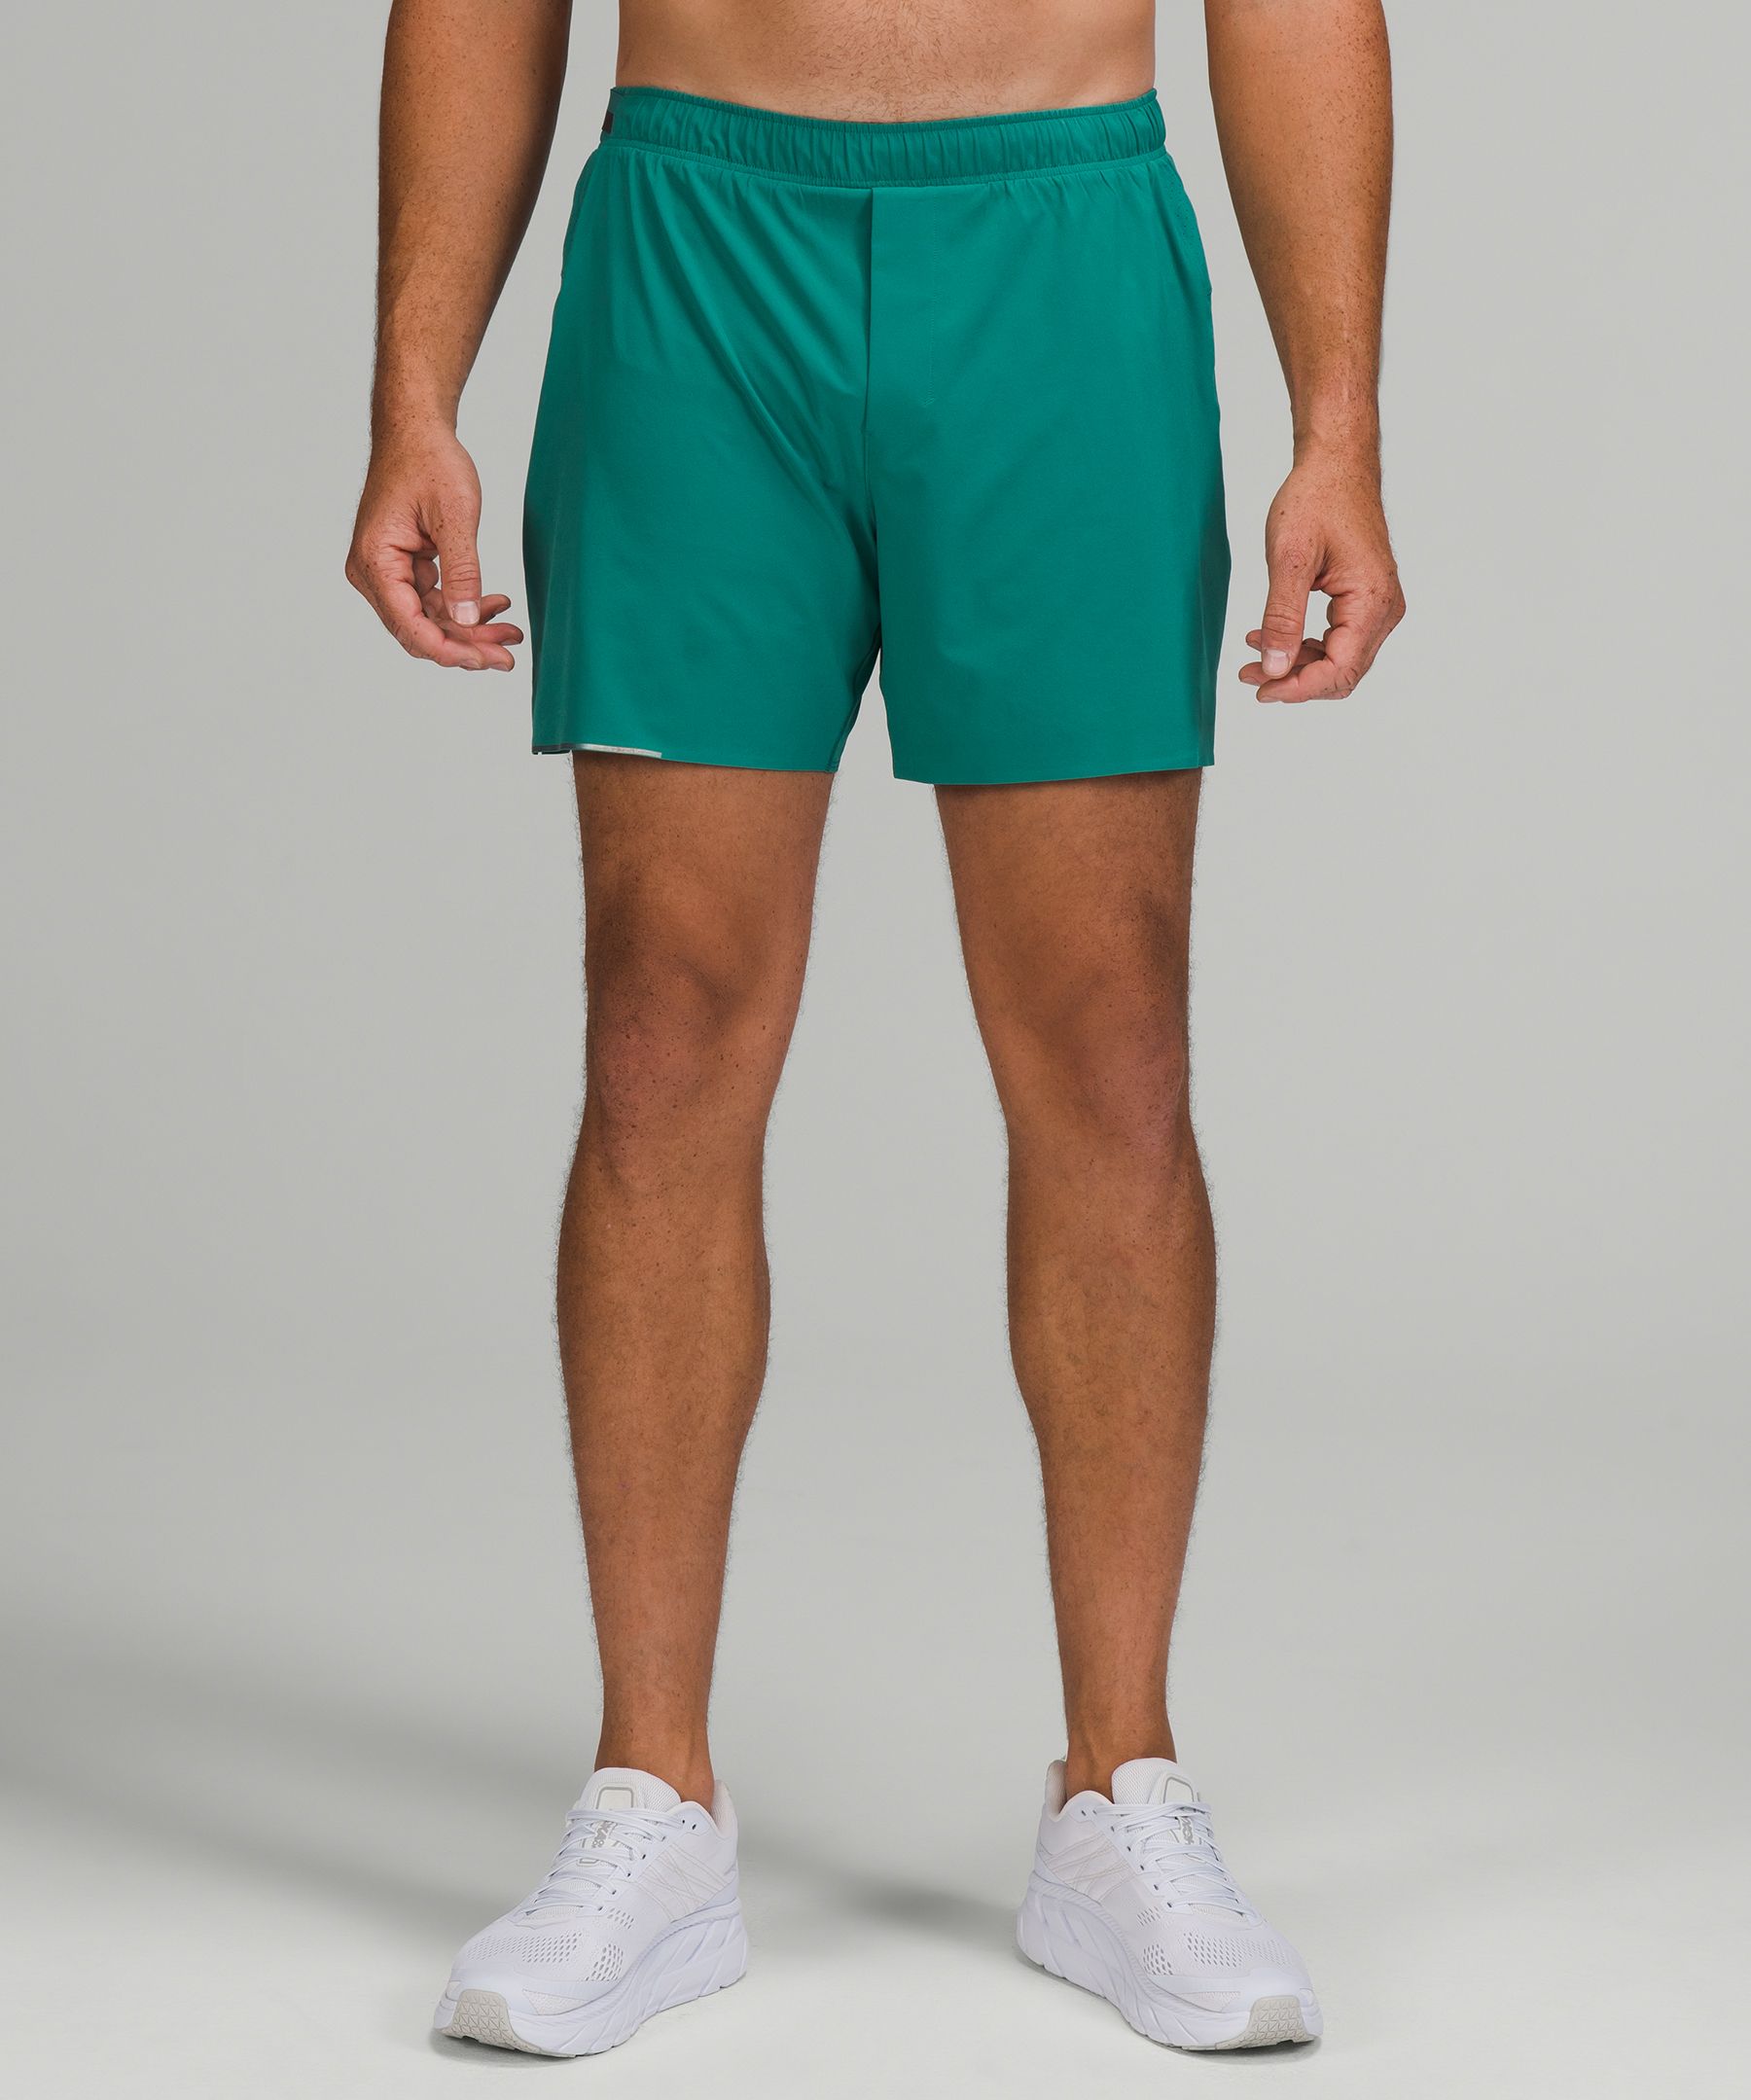 Lululemon Surge Lined Shorts 6" In Teal Lagoon